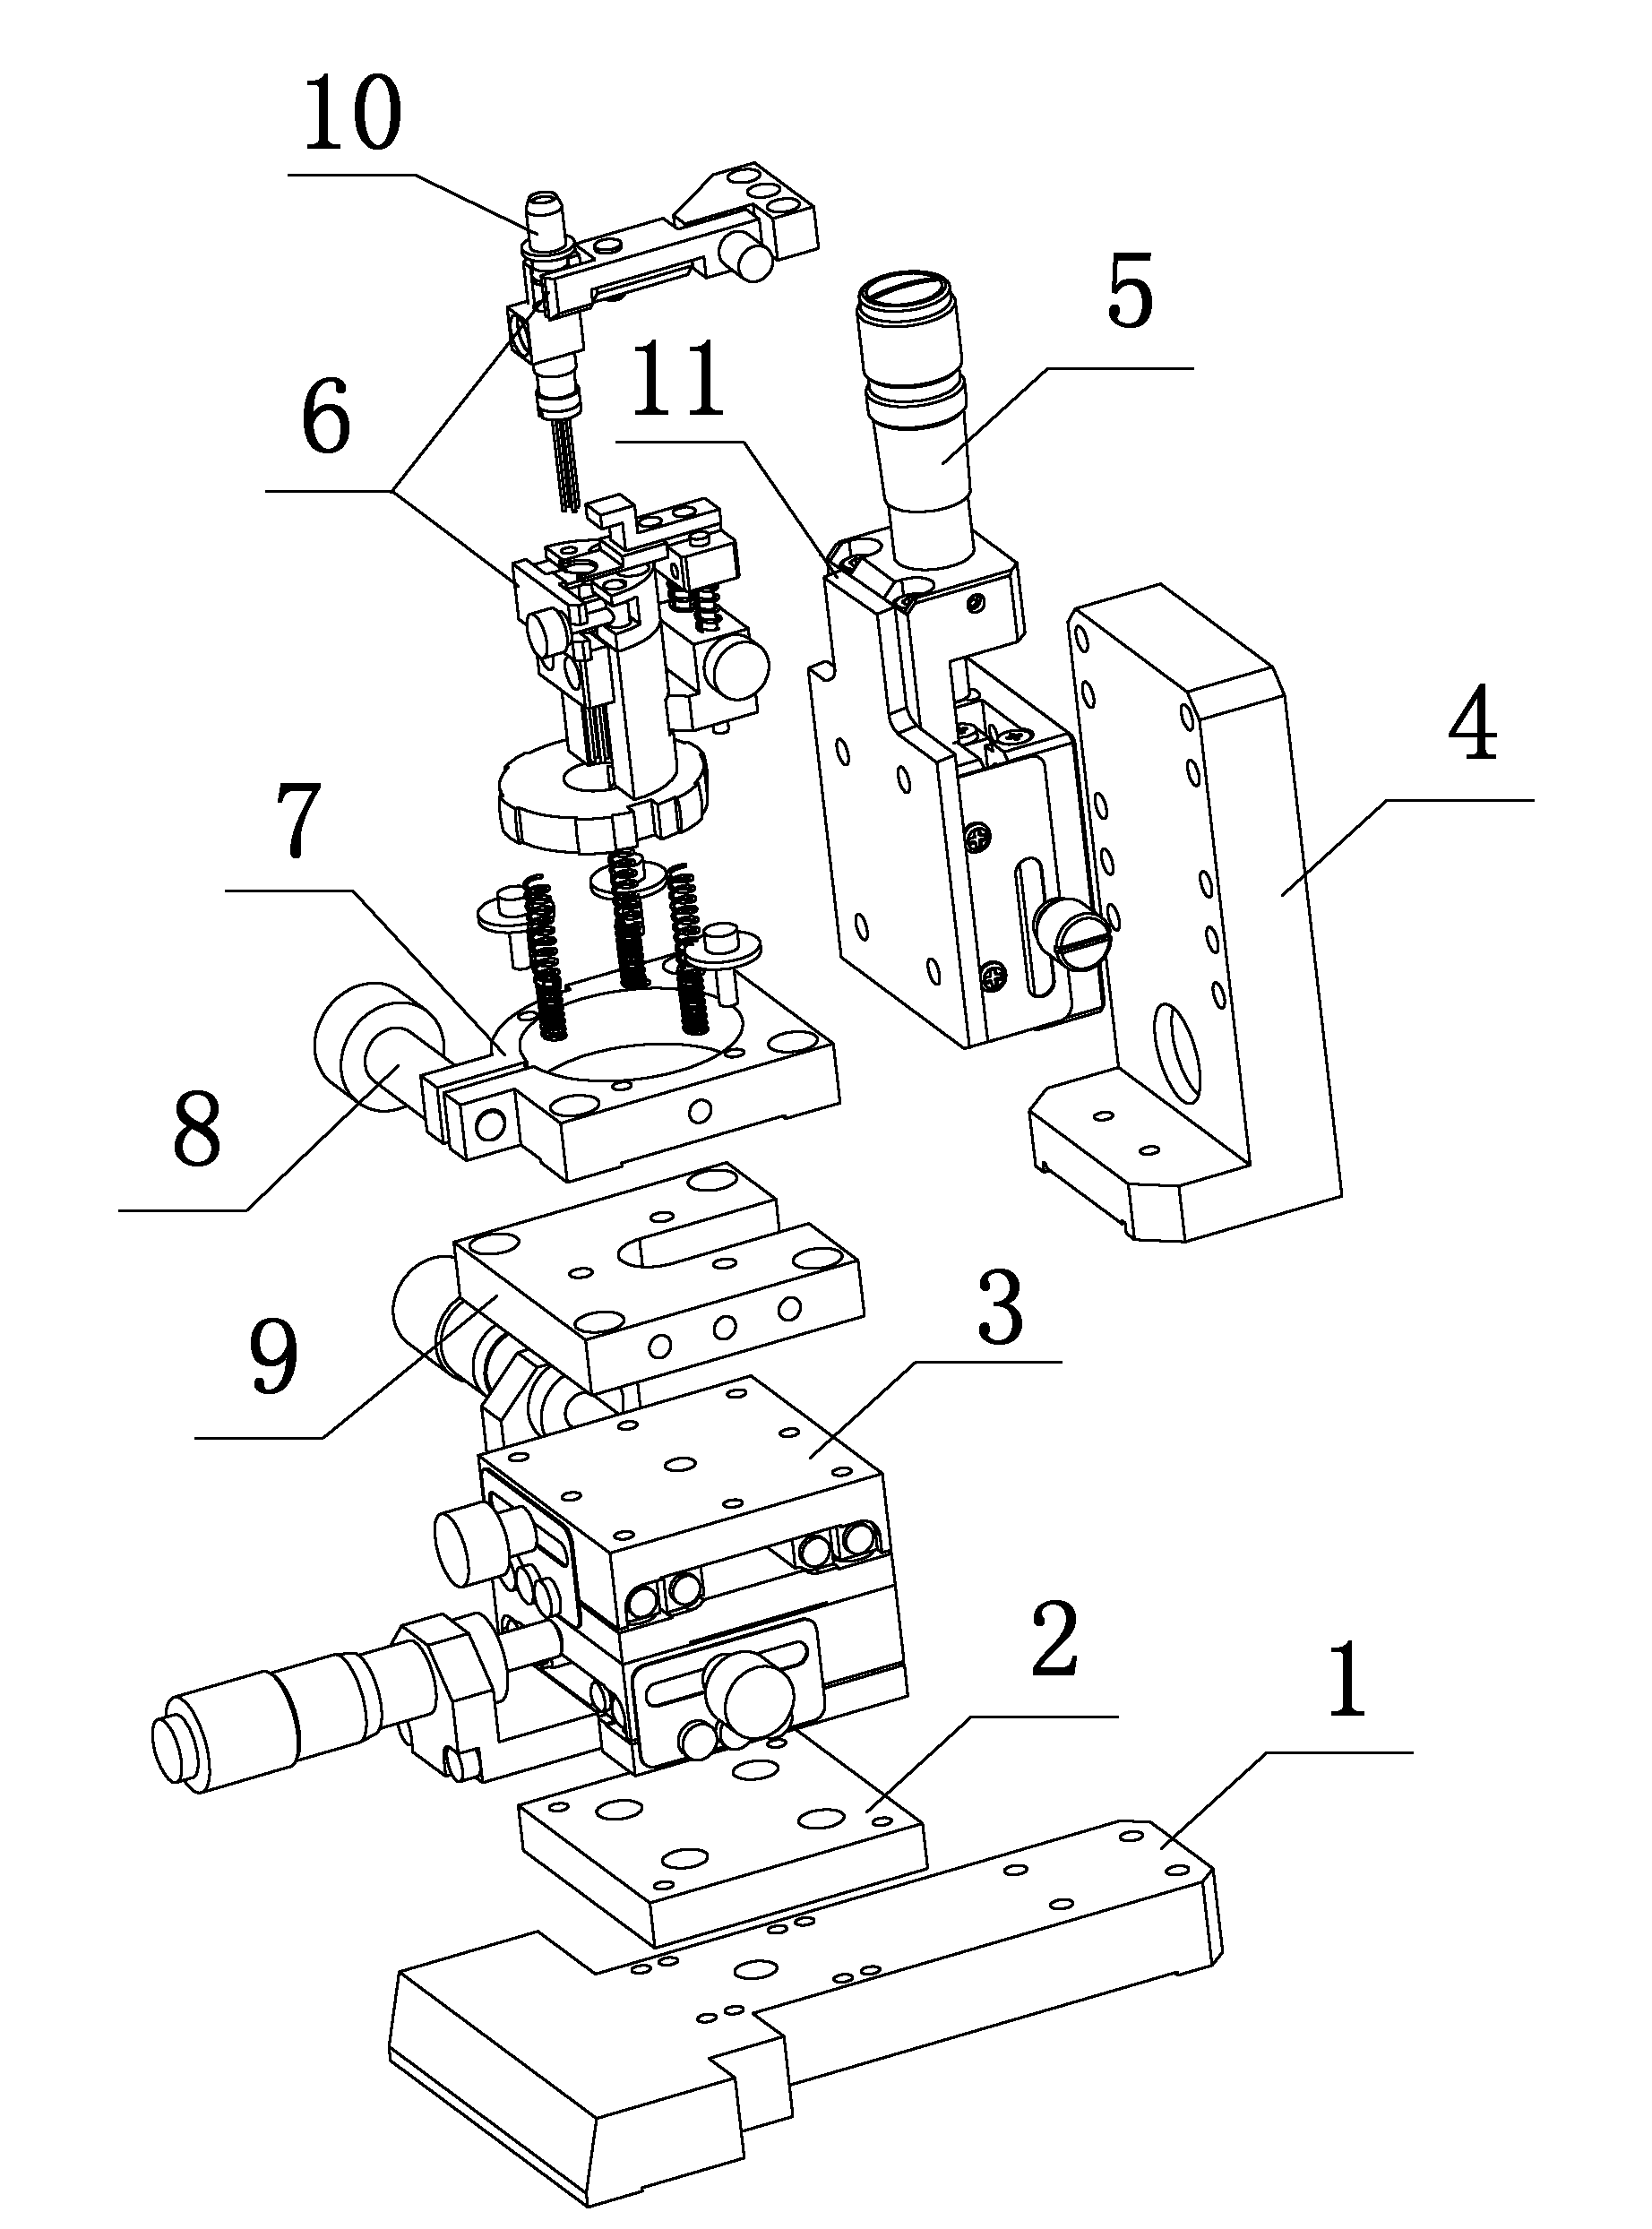 Clamp for coupling welding light-emitting device